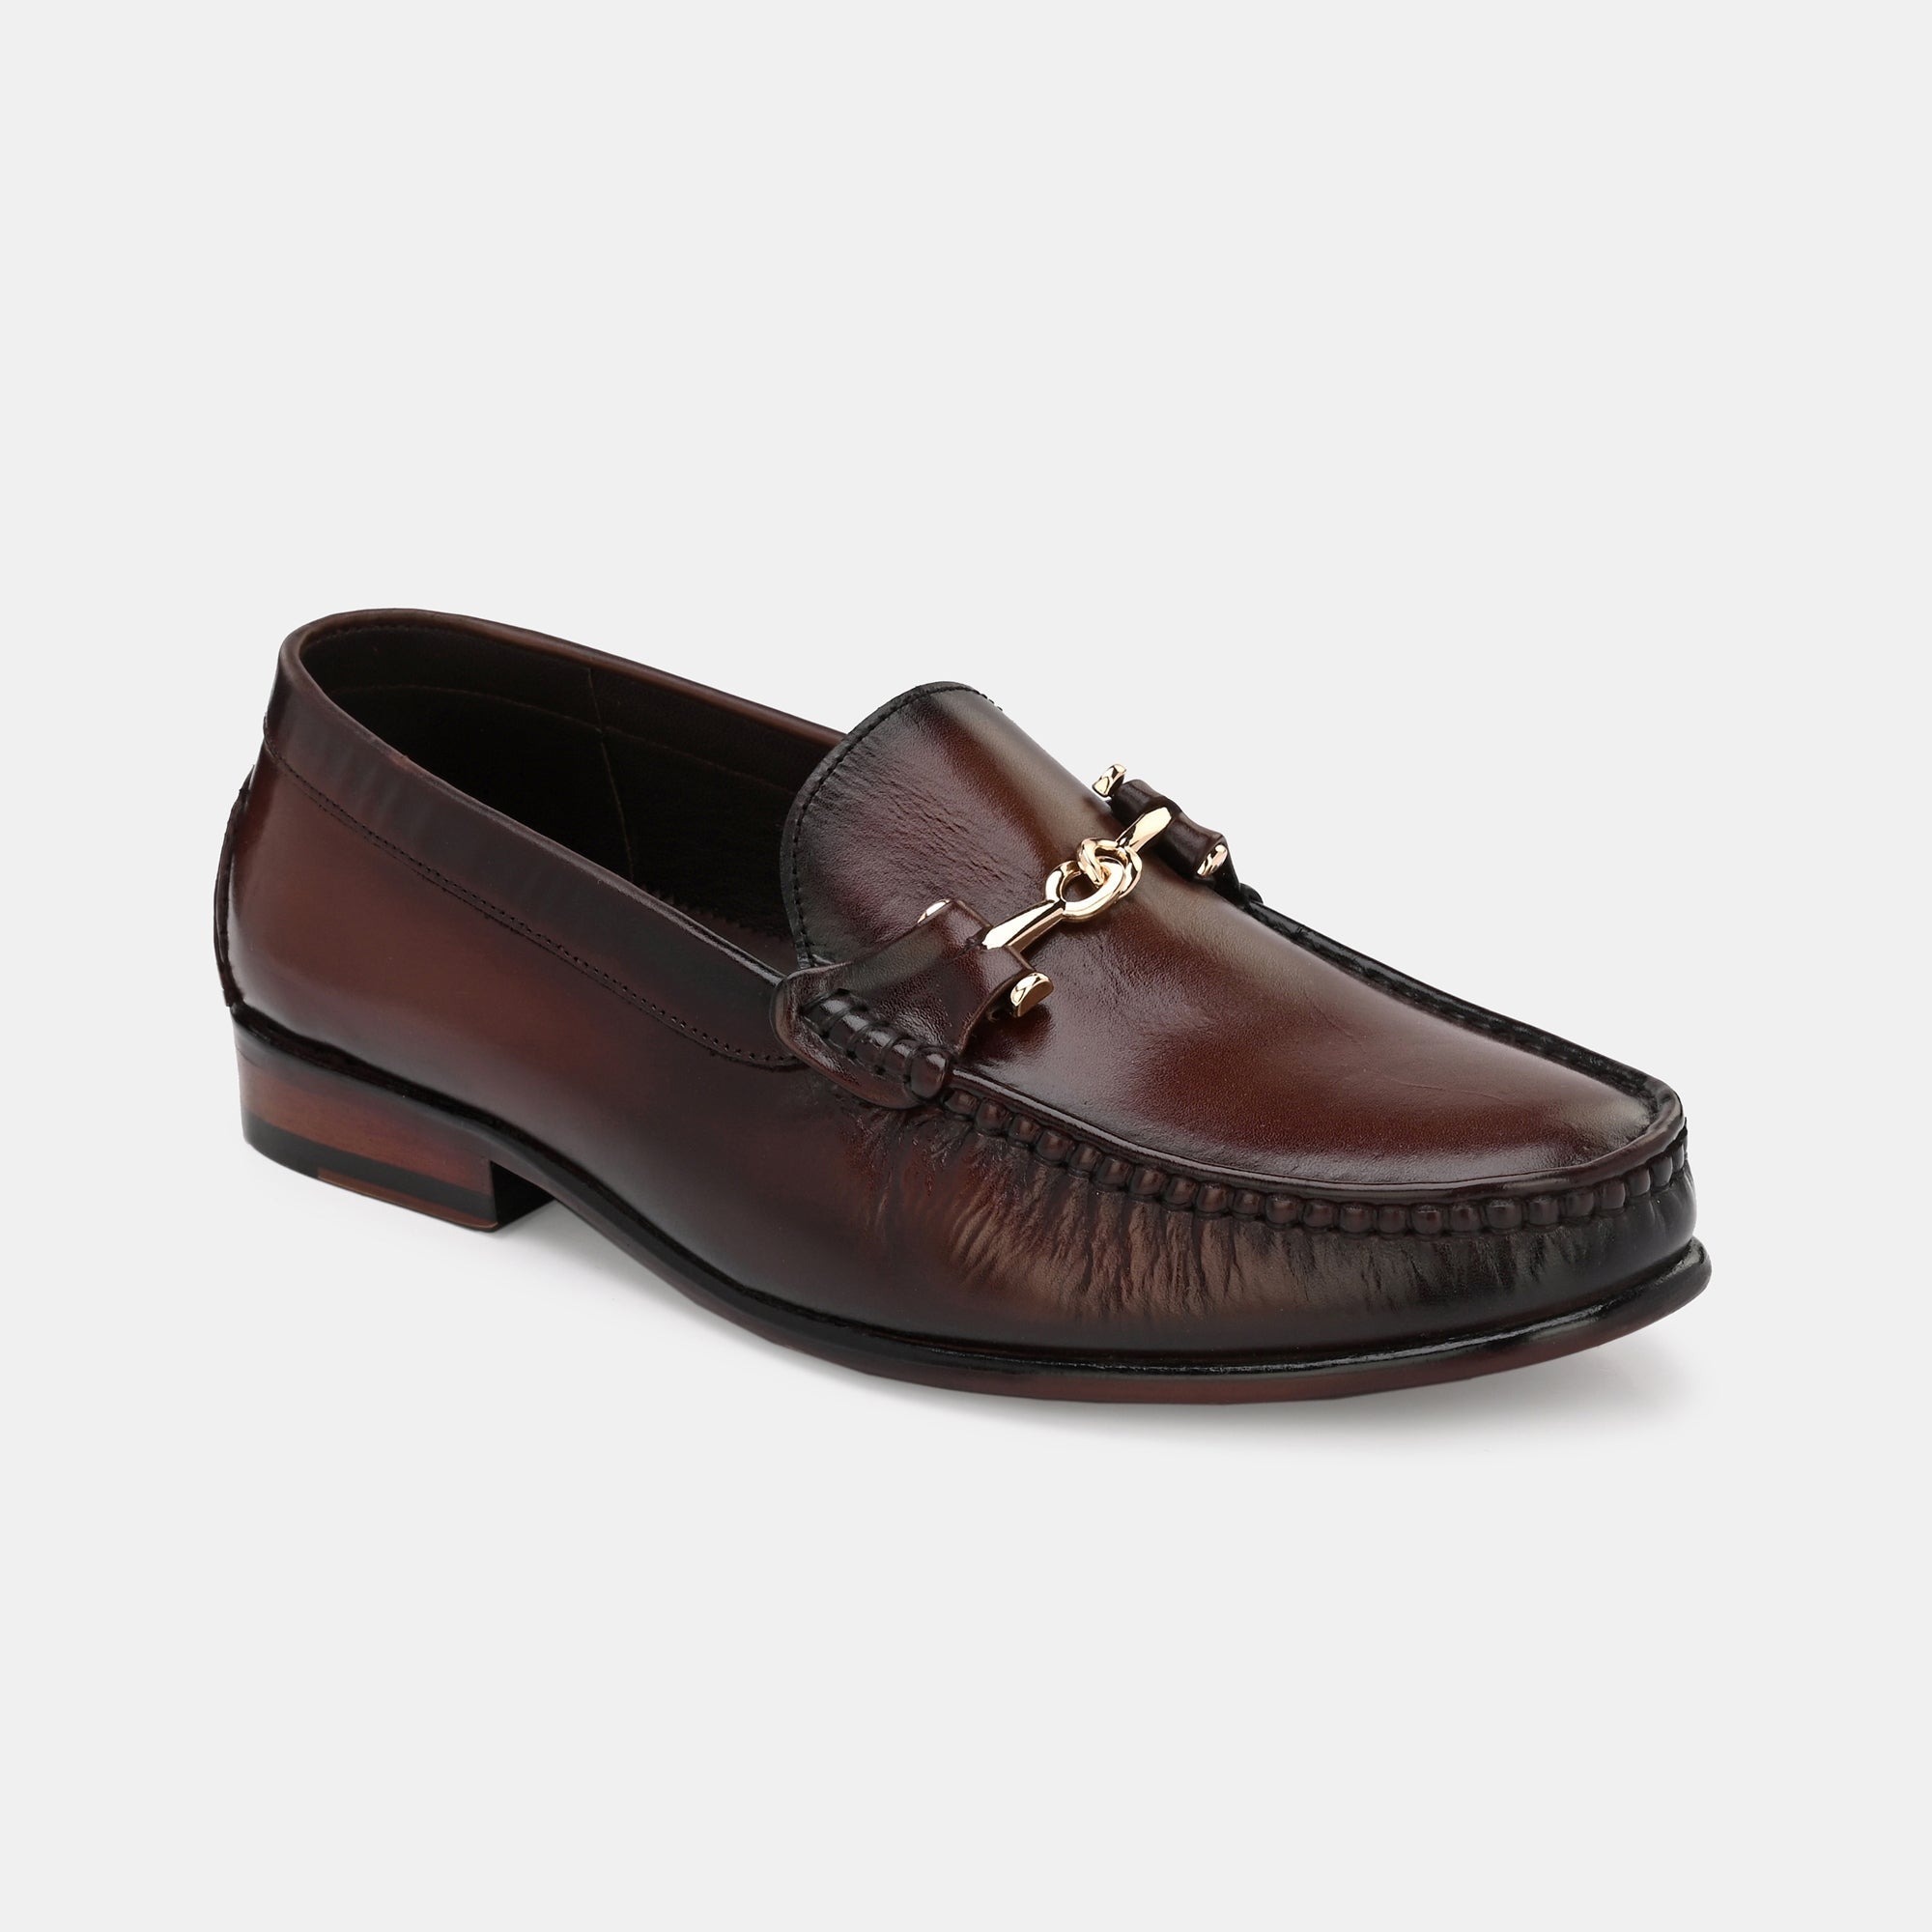 Brown Buckled Loafers by Lafattio